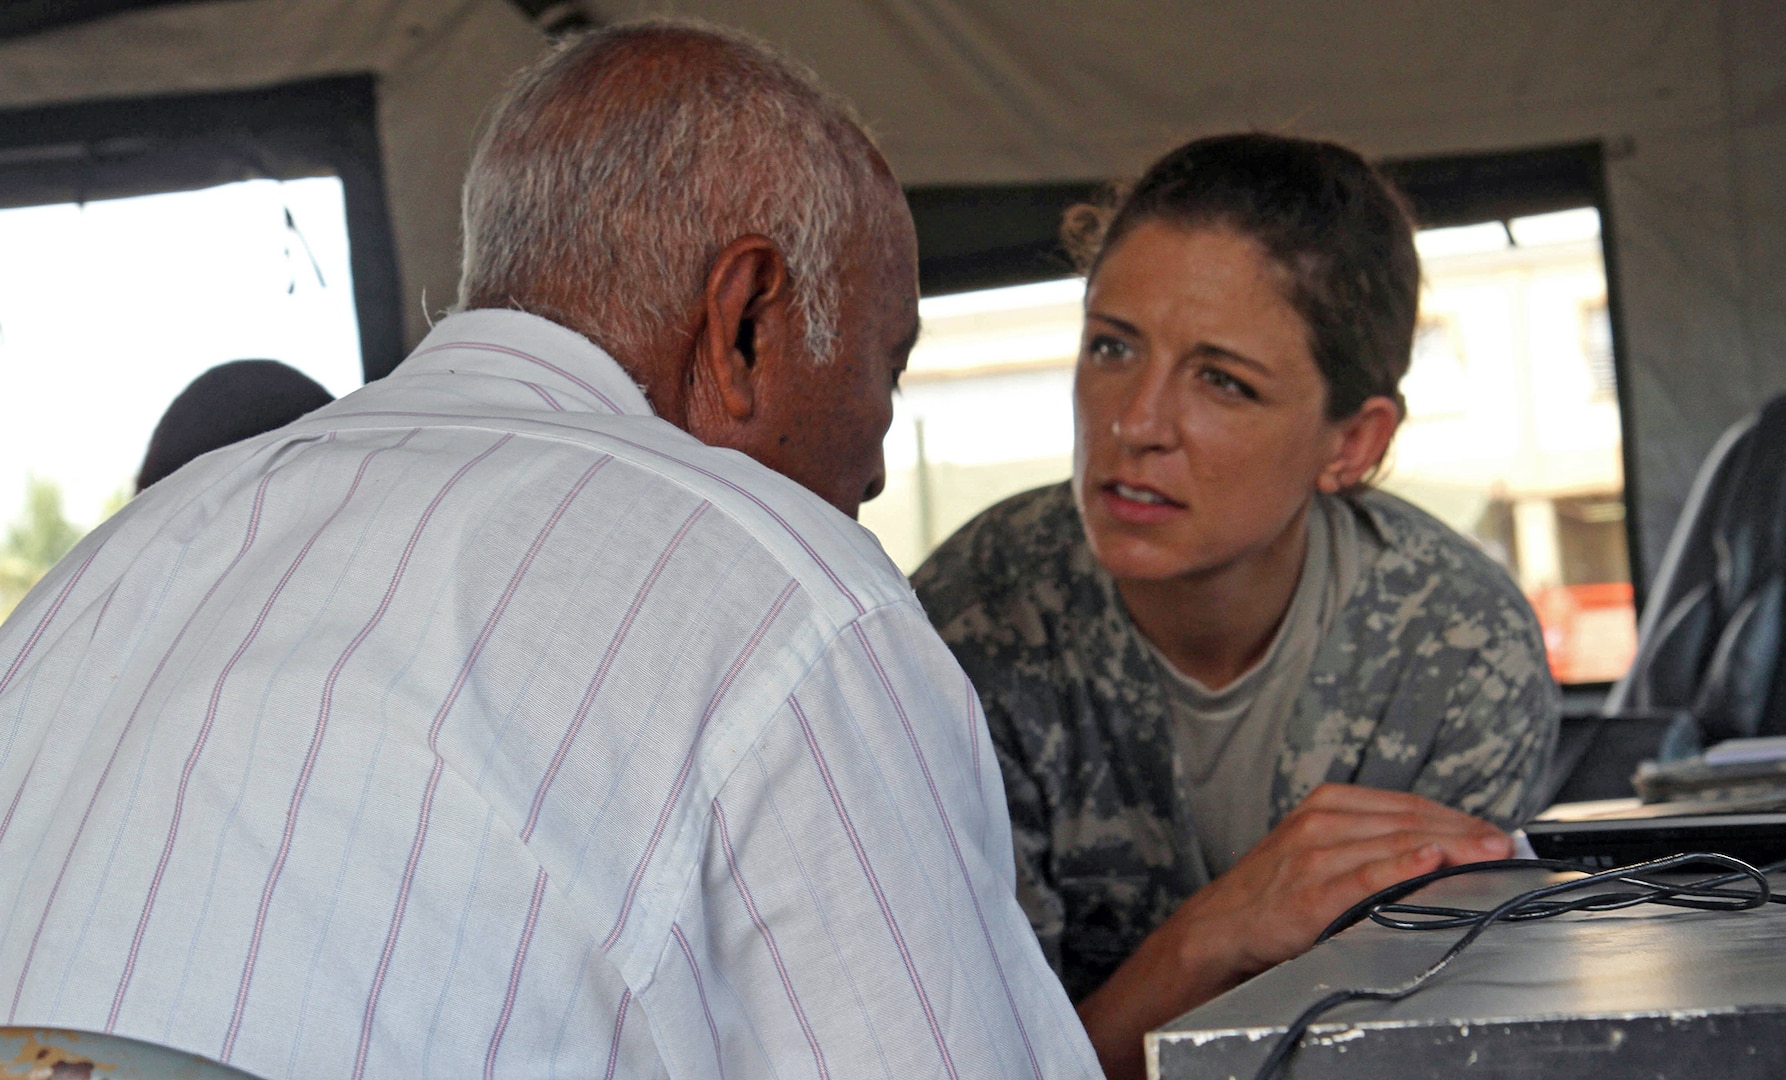 Sgt. Samantha Miller, a dental technician assigned to the Utah National Guard Medical Command, speaks with a local Belizean man about dental treatment April 9, 2017, during a free medical event held in Ladyville, Belize as a part of Beyond the Horizon 2017.  BTH 2017 is an on-going partnership exercise between the Government of Belize and U.S. Southern Command that will provide three free medical service events and five construction projects throughout the country of Belize from March 25 until June 17. (U.S. Army Photo by Staff Sgt. Fredrick Varney, 131st Mobile Public Affairs Detachment)